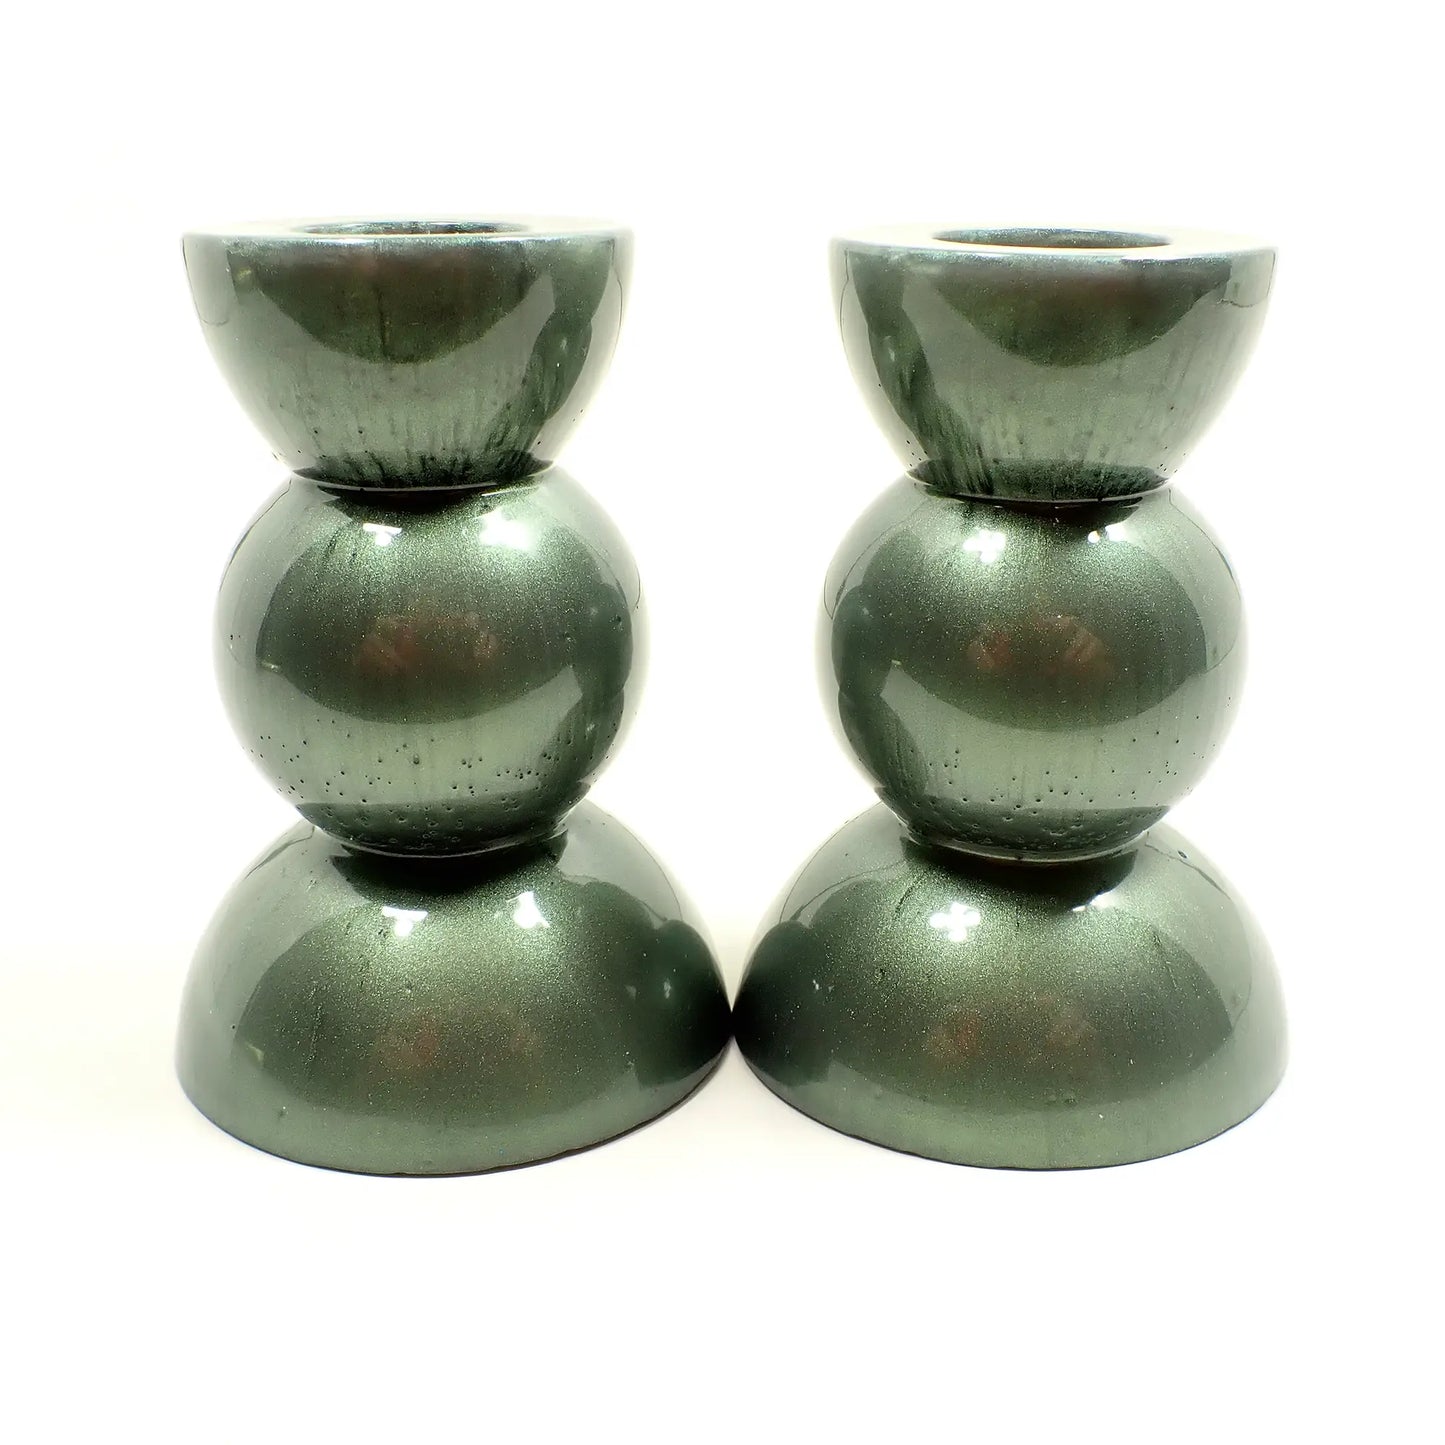 Set of Two Handmade Pearly Light Olive Green Resin Rounded Geometric Candlestick Holders